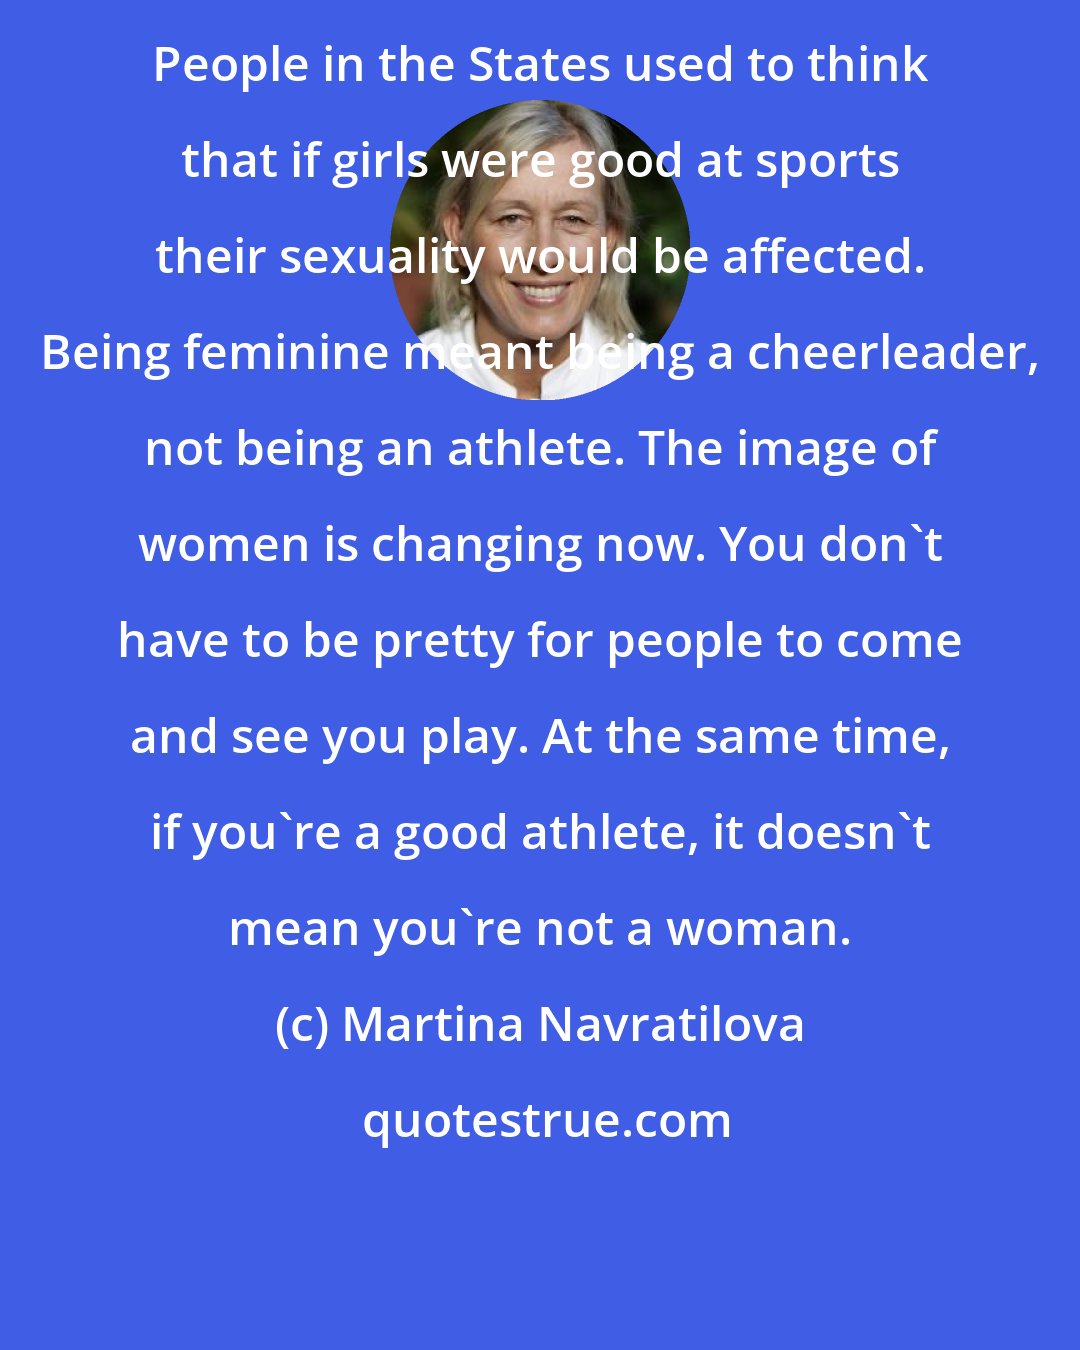 Martina Navratilova: People in the States used to think that if girls were good at sports their sexuality would be affected. Being feminine meant being a cheerleader, not being an athlete. The image of women is changing now. You don't have to be pretty for people to come and see you play. At the same time, if you're a good athlete, it doesn't mean you're not a woman.